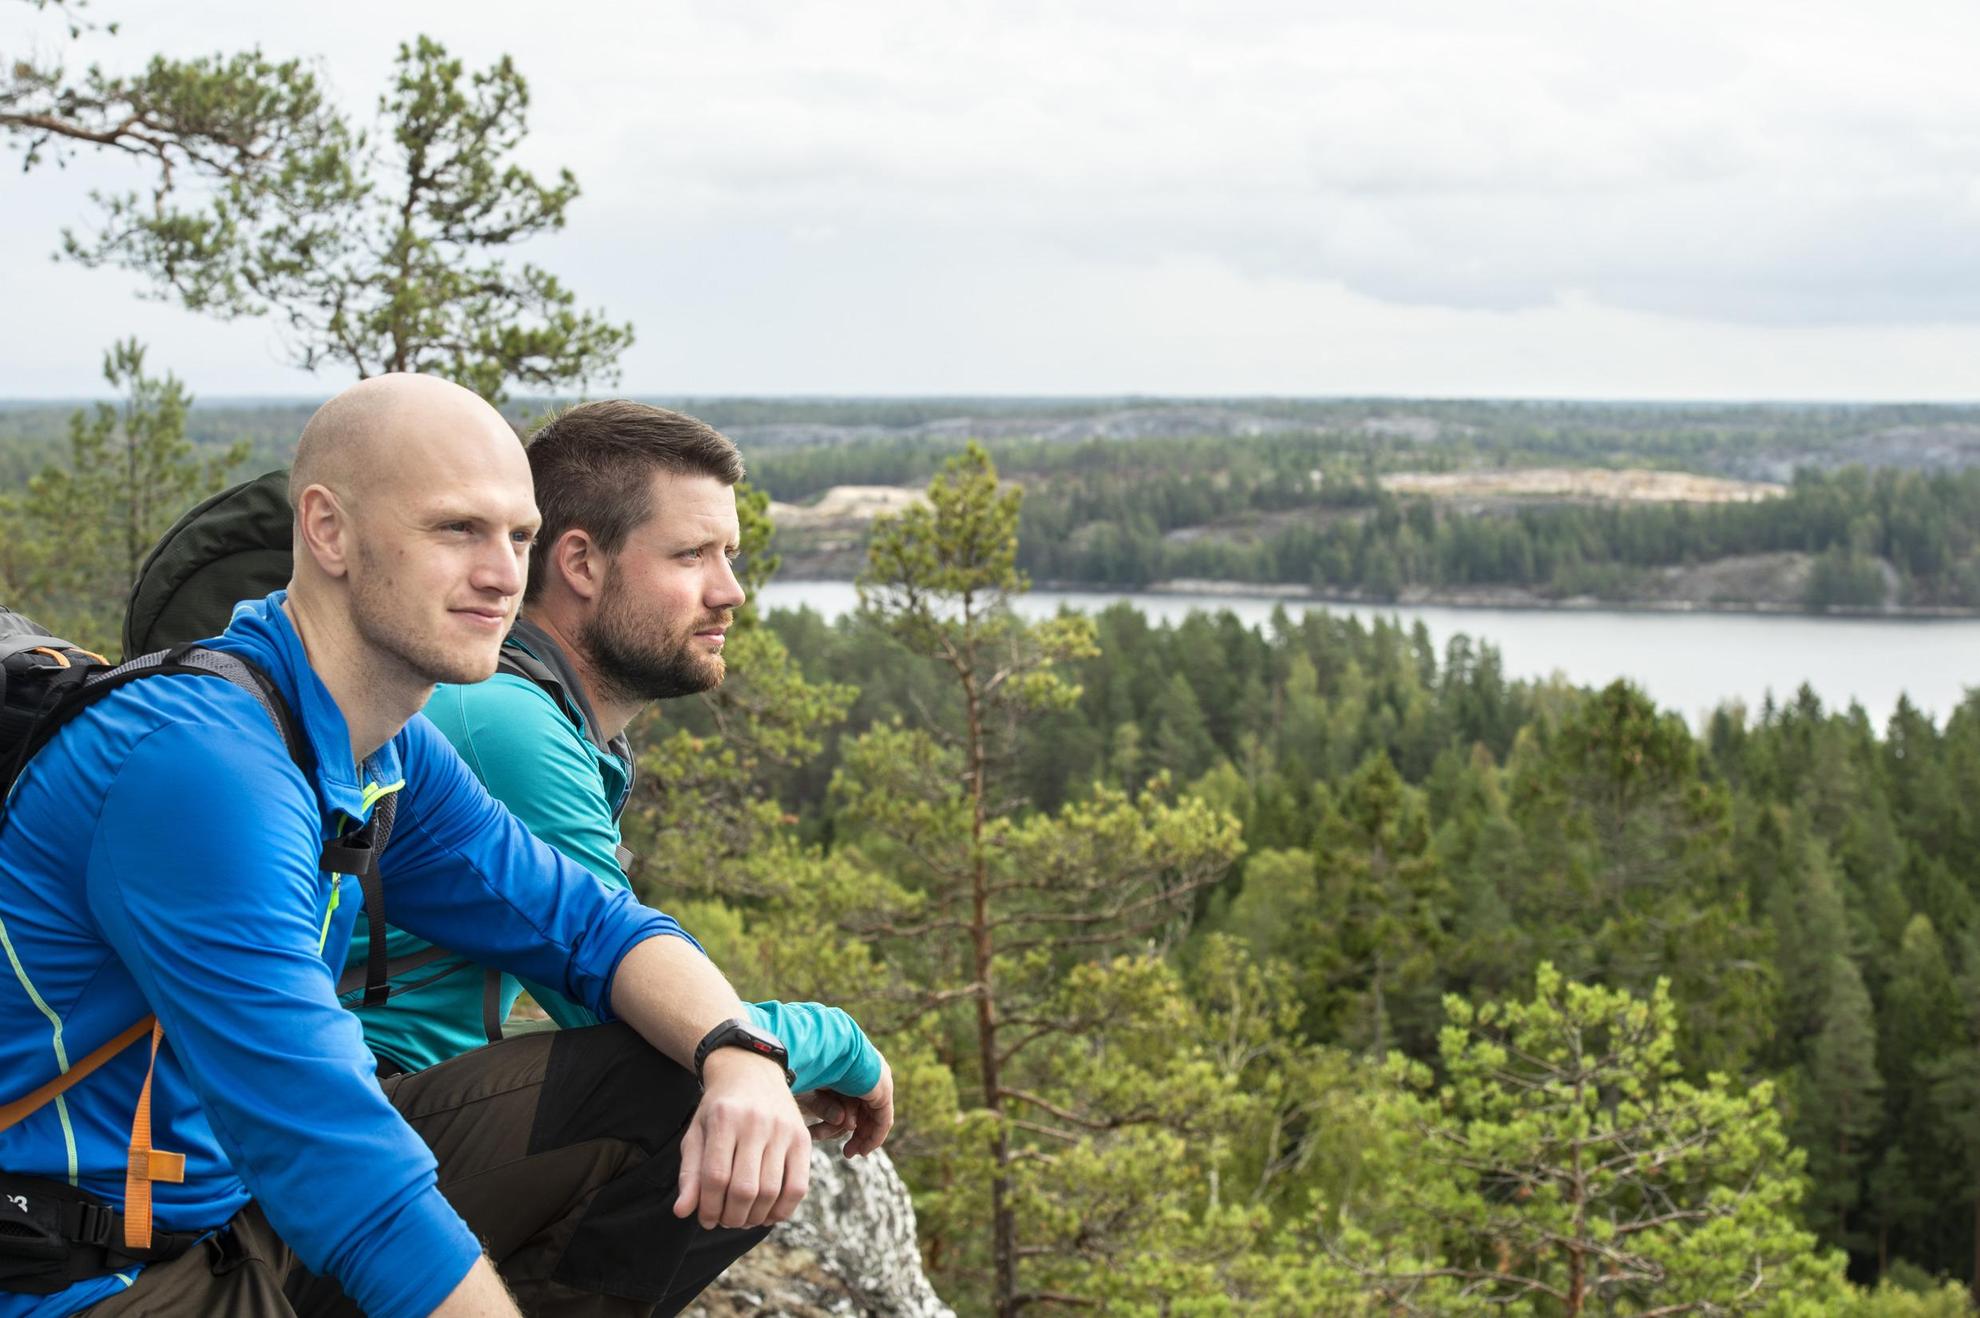 Two men on a hill looking out over forest and a lake.